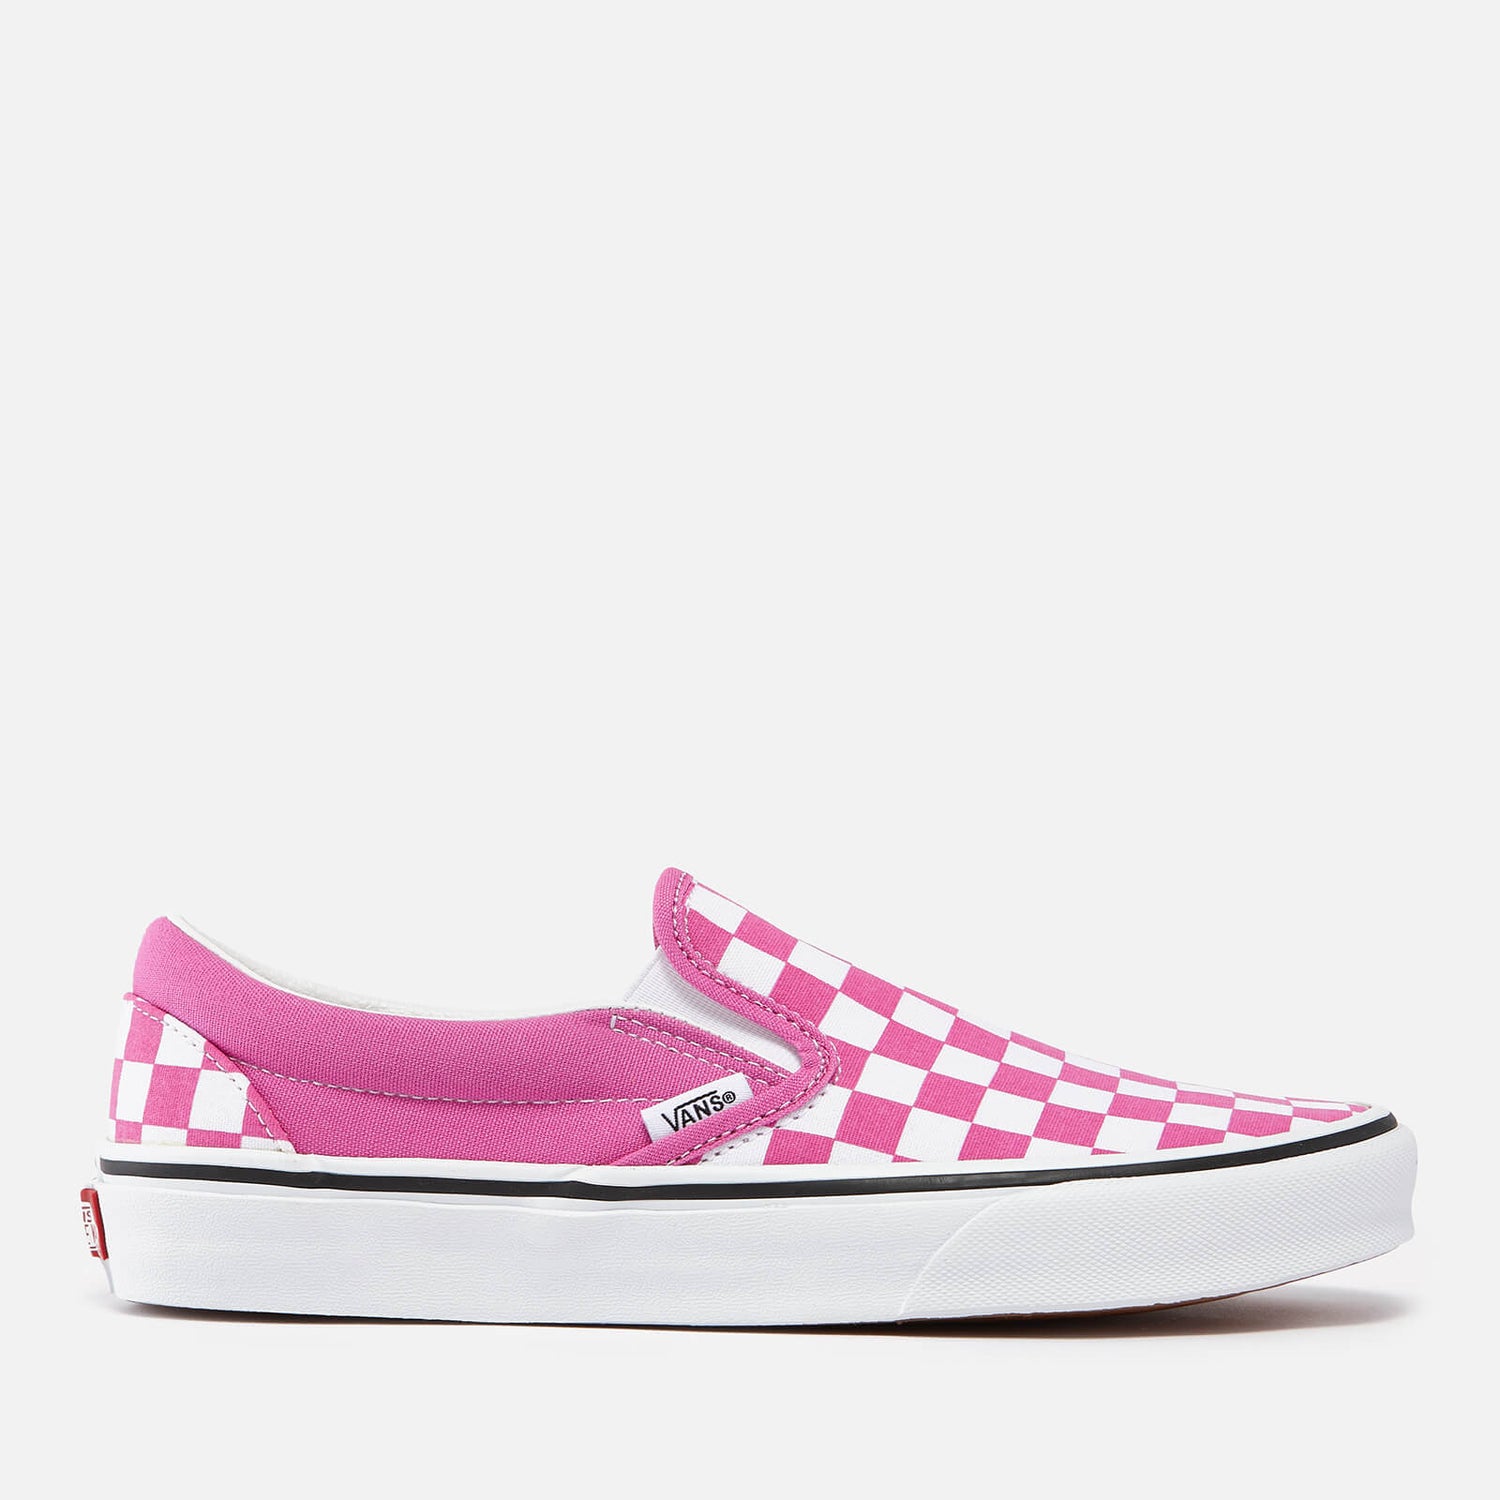 Vans Checkerboard Classic Slip-On Trainers